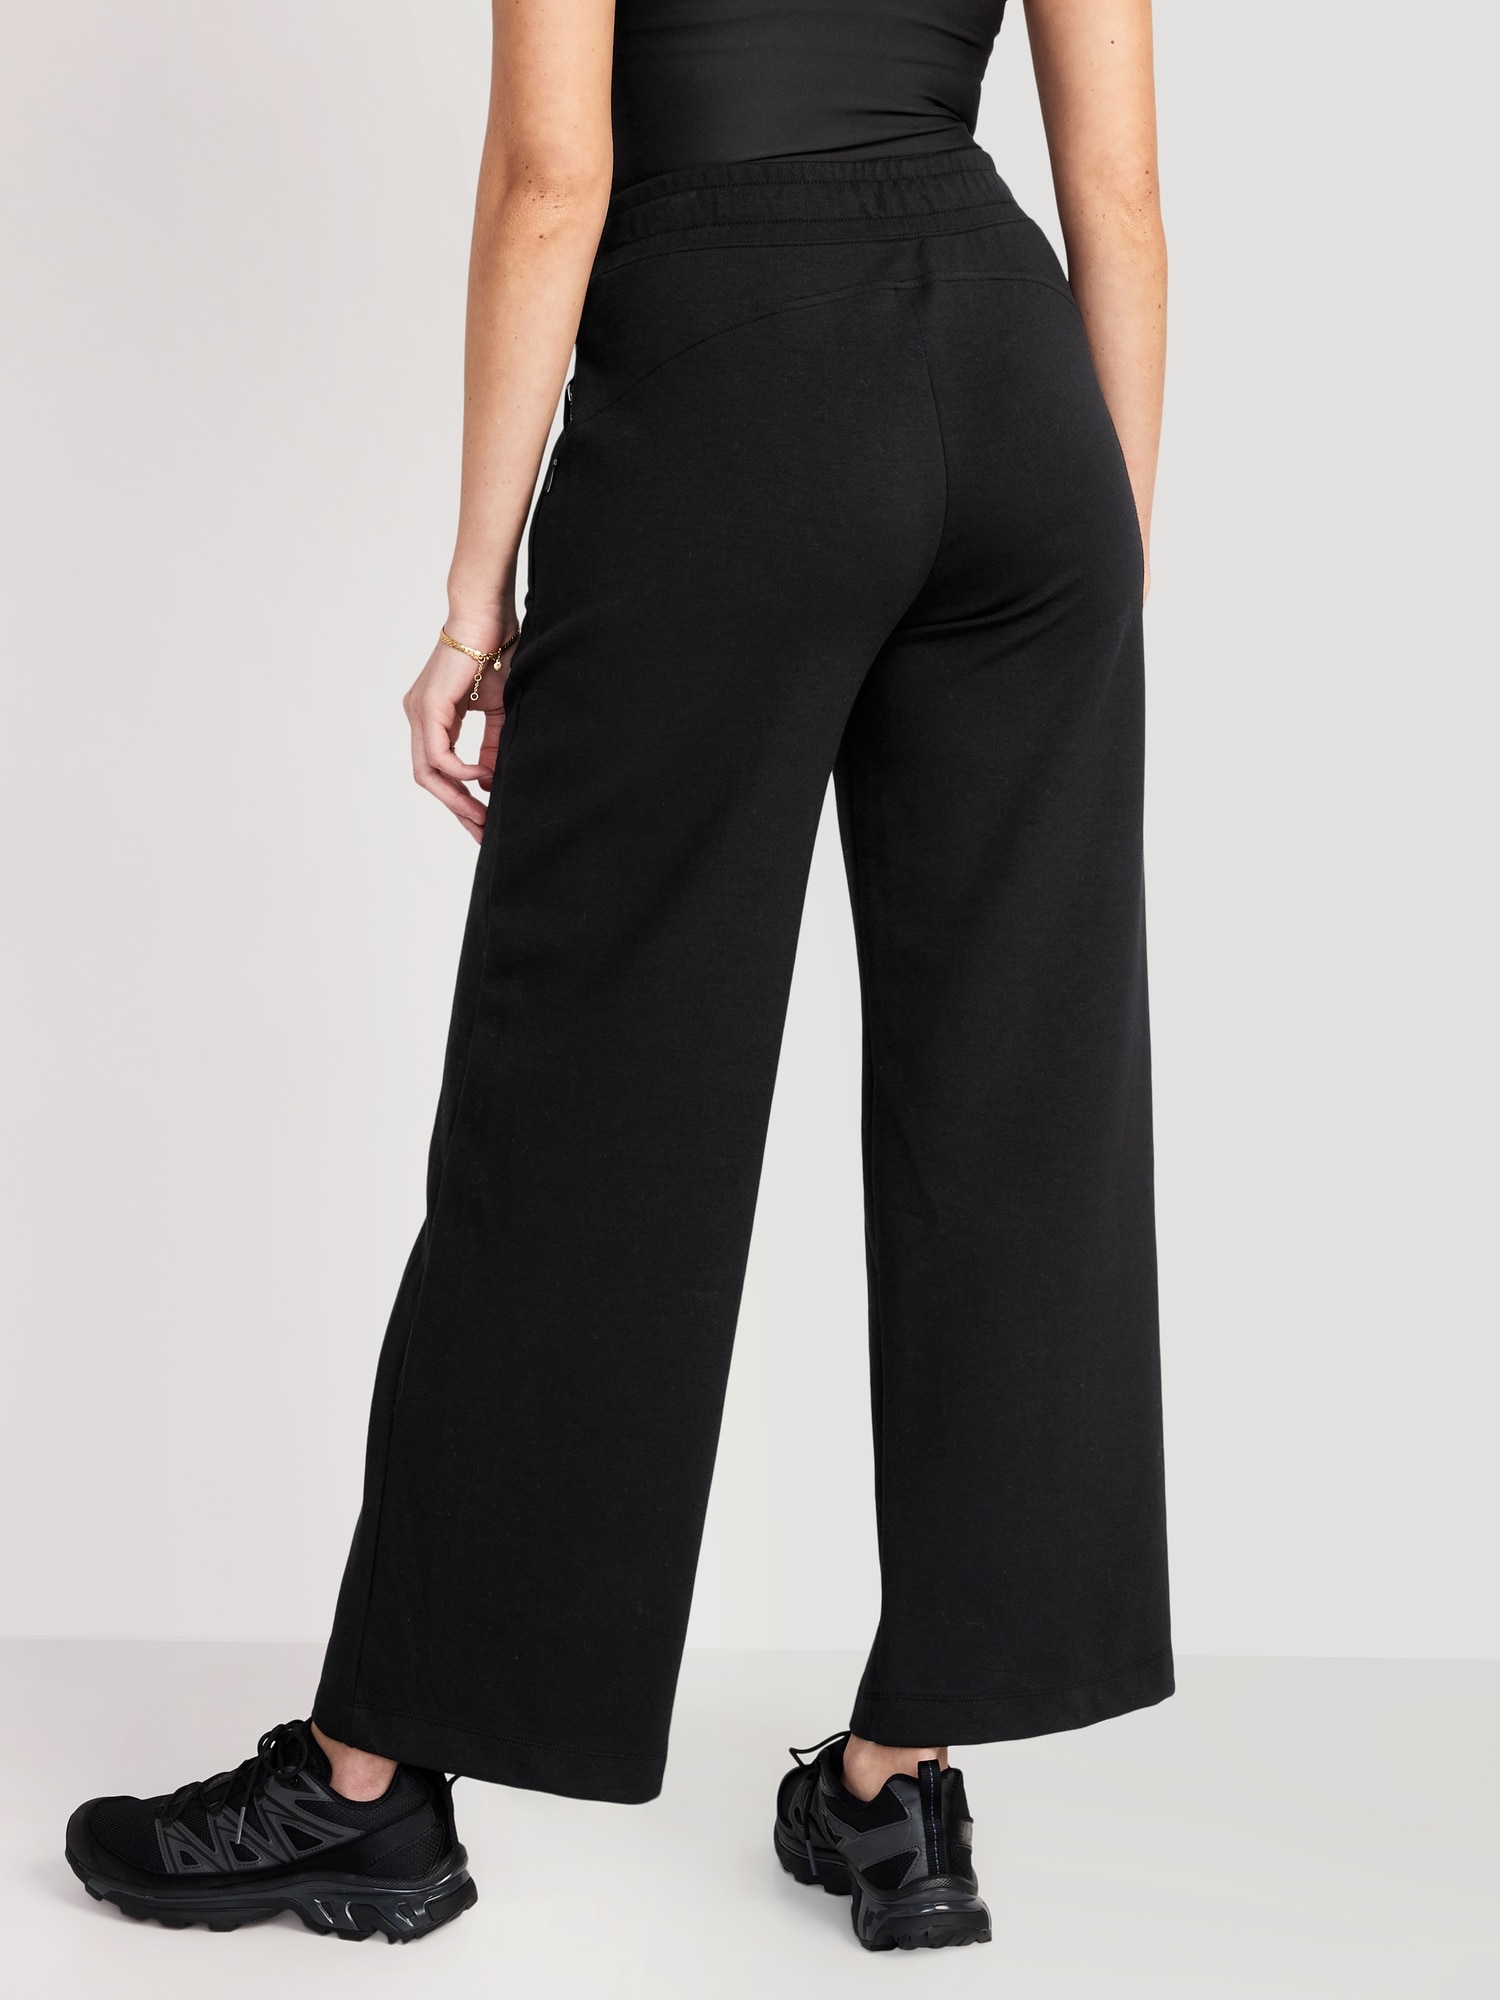 Old Navy Black Wide Leg Pants Review Business Casual Outfit for